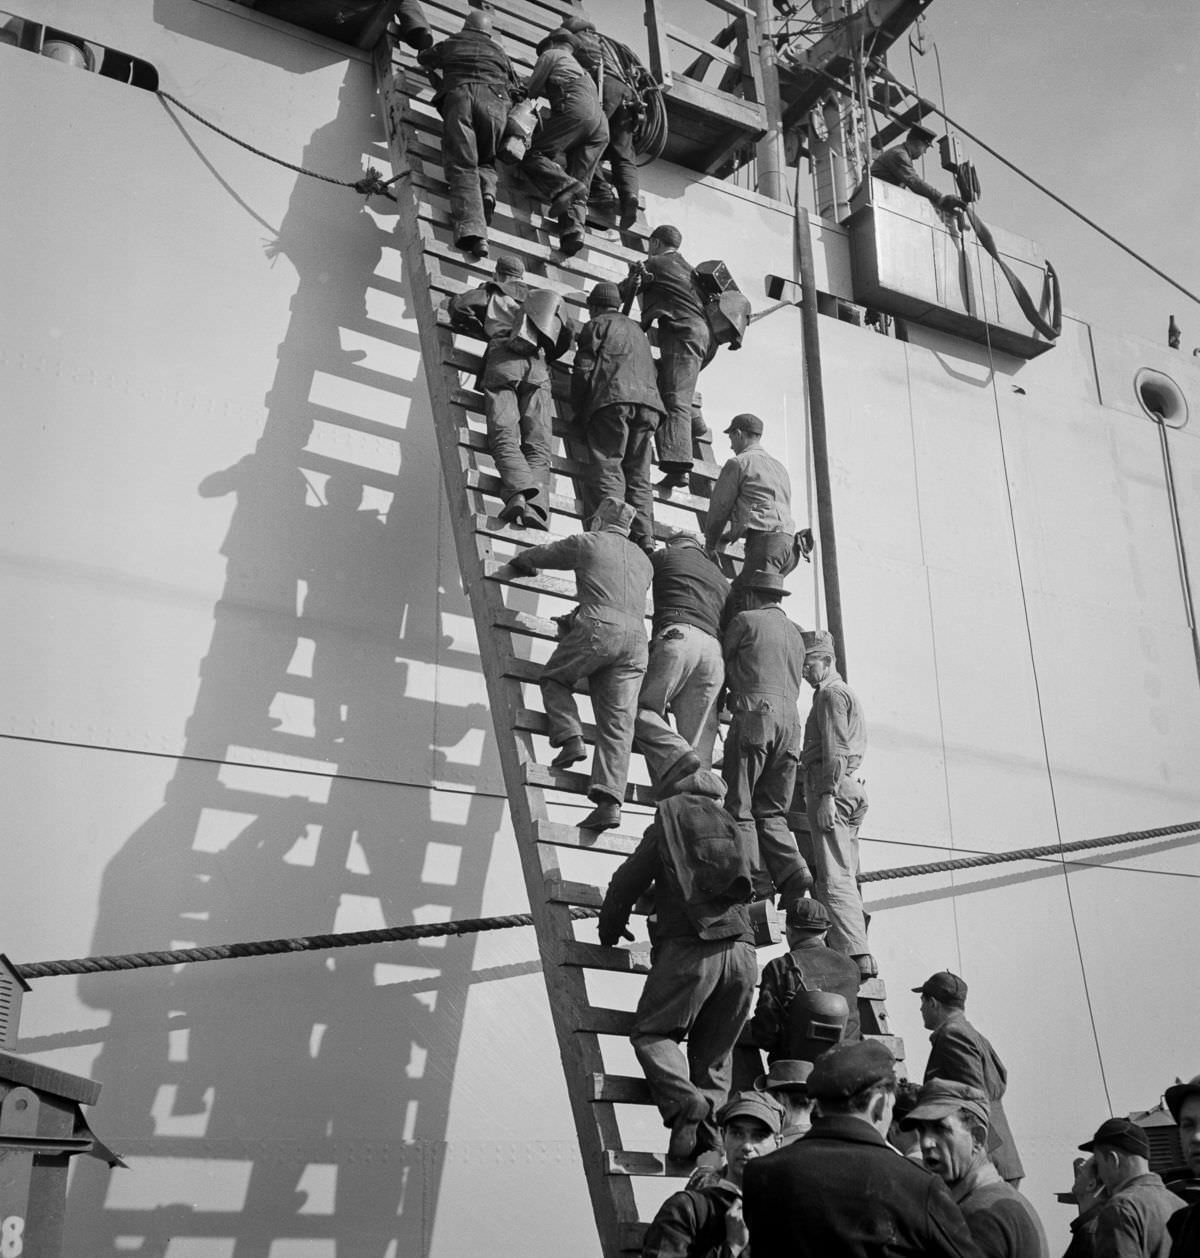 Workers climb a ladder on the outfitting pier